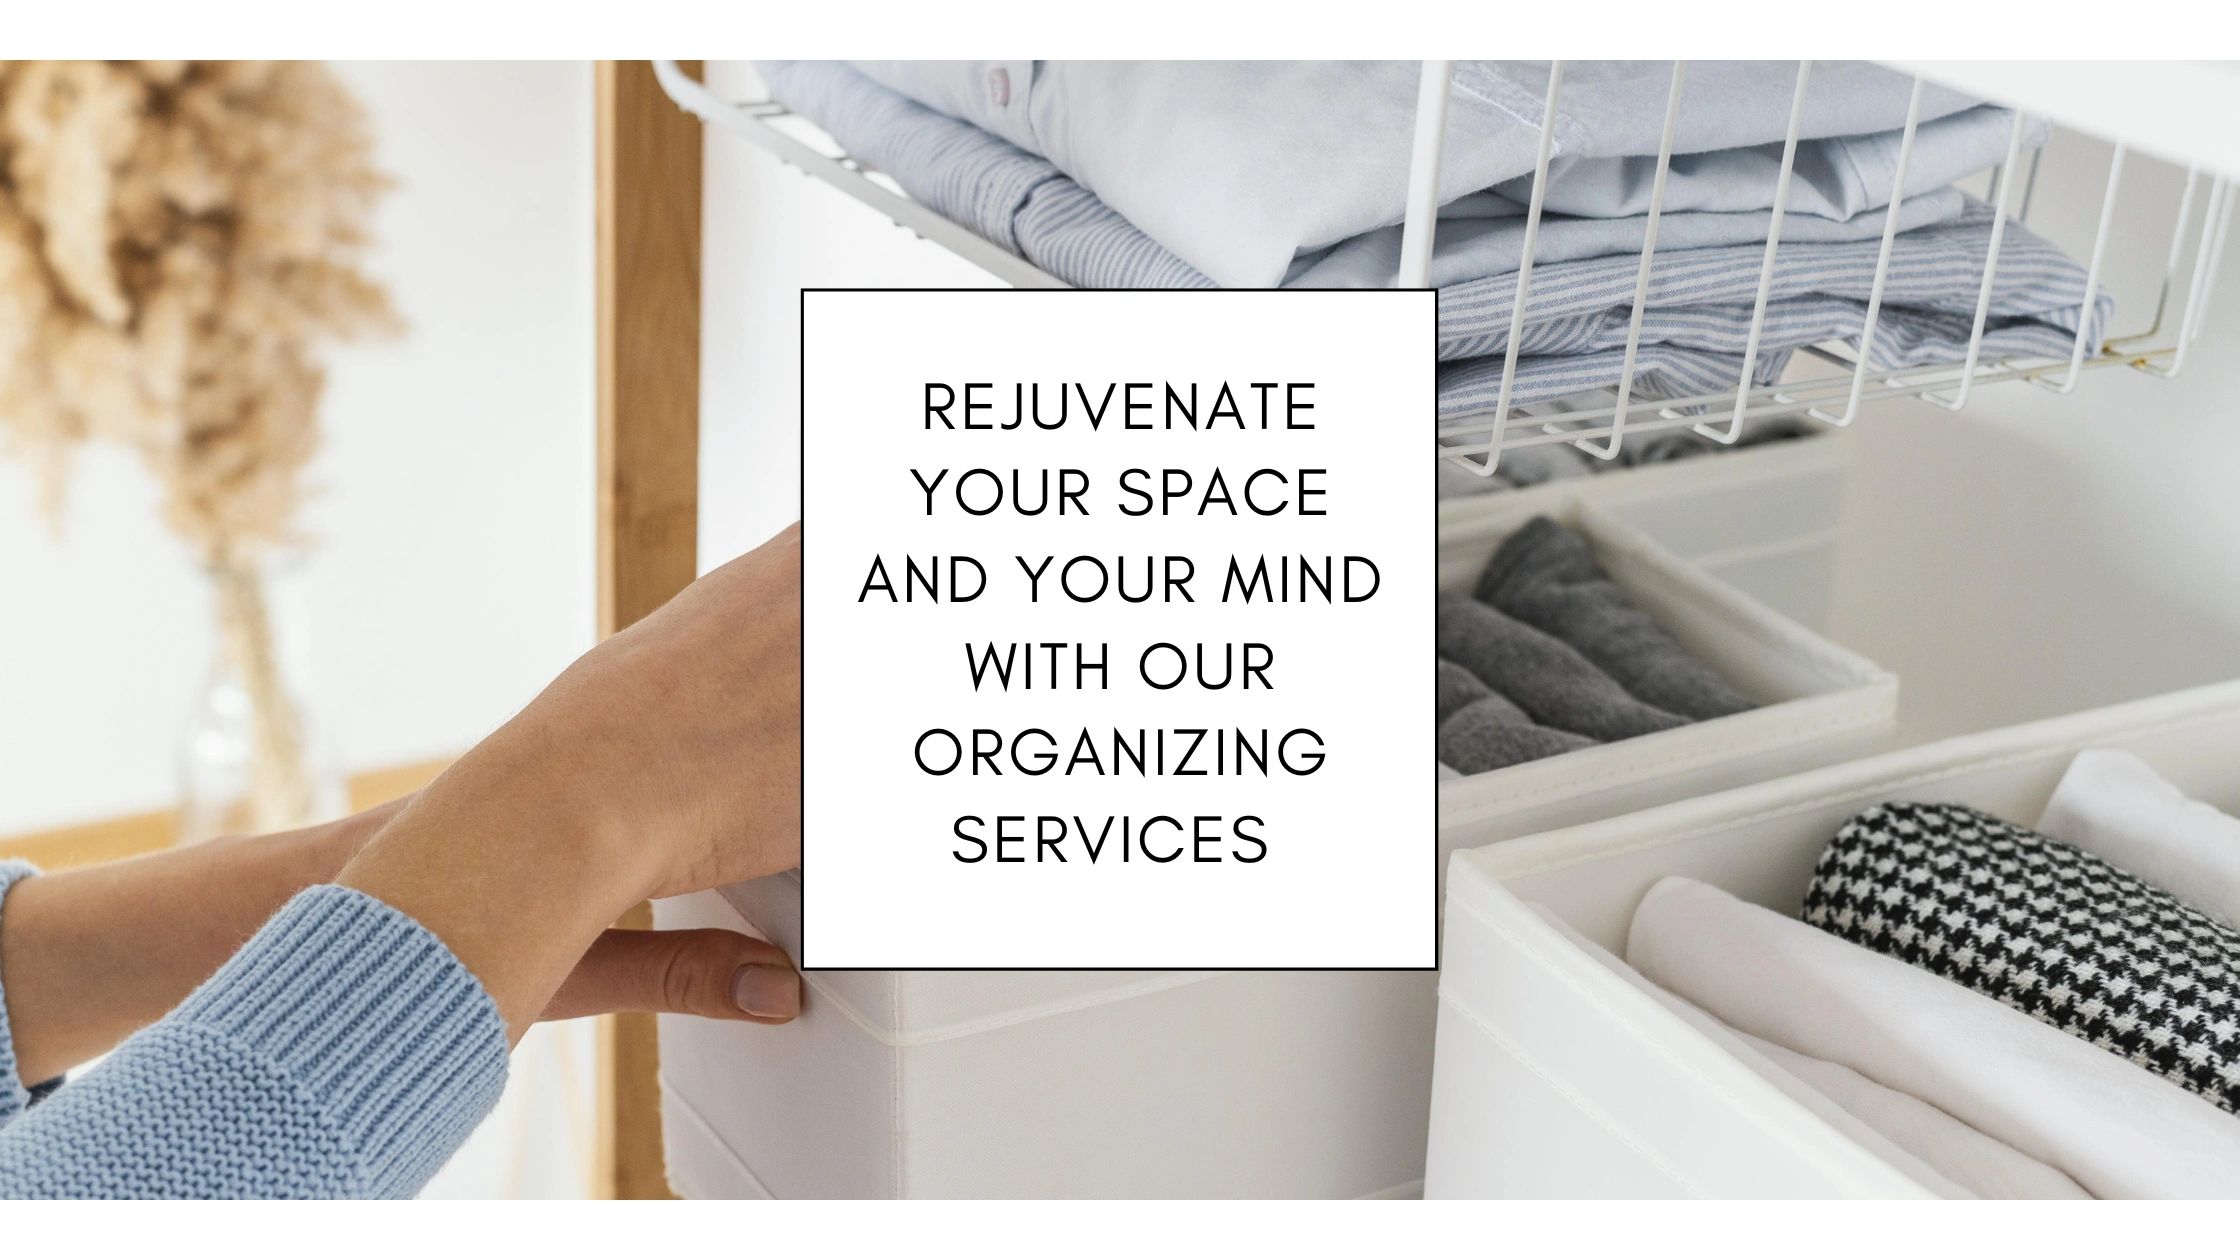 Rejuvenate your space and your mind with our organizing services.